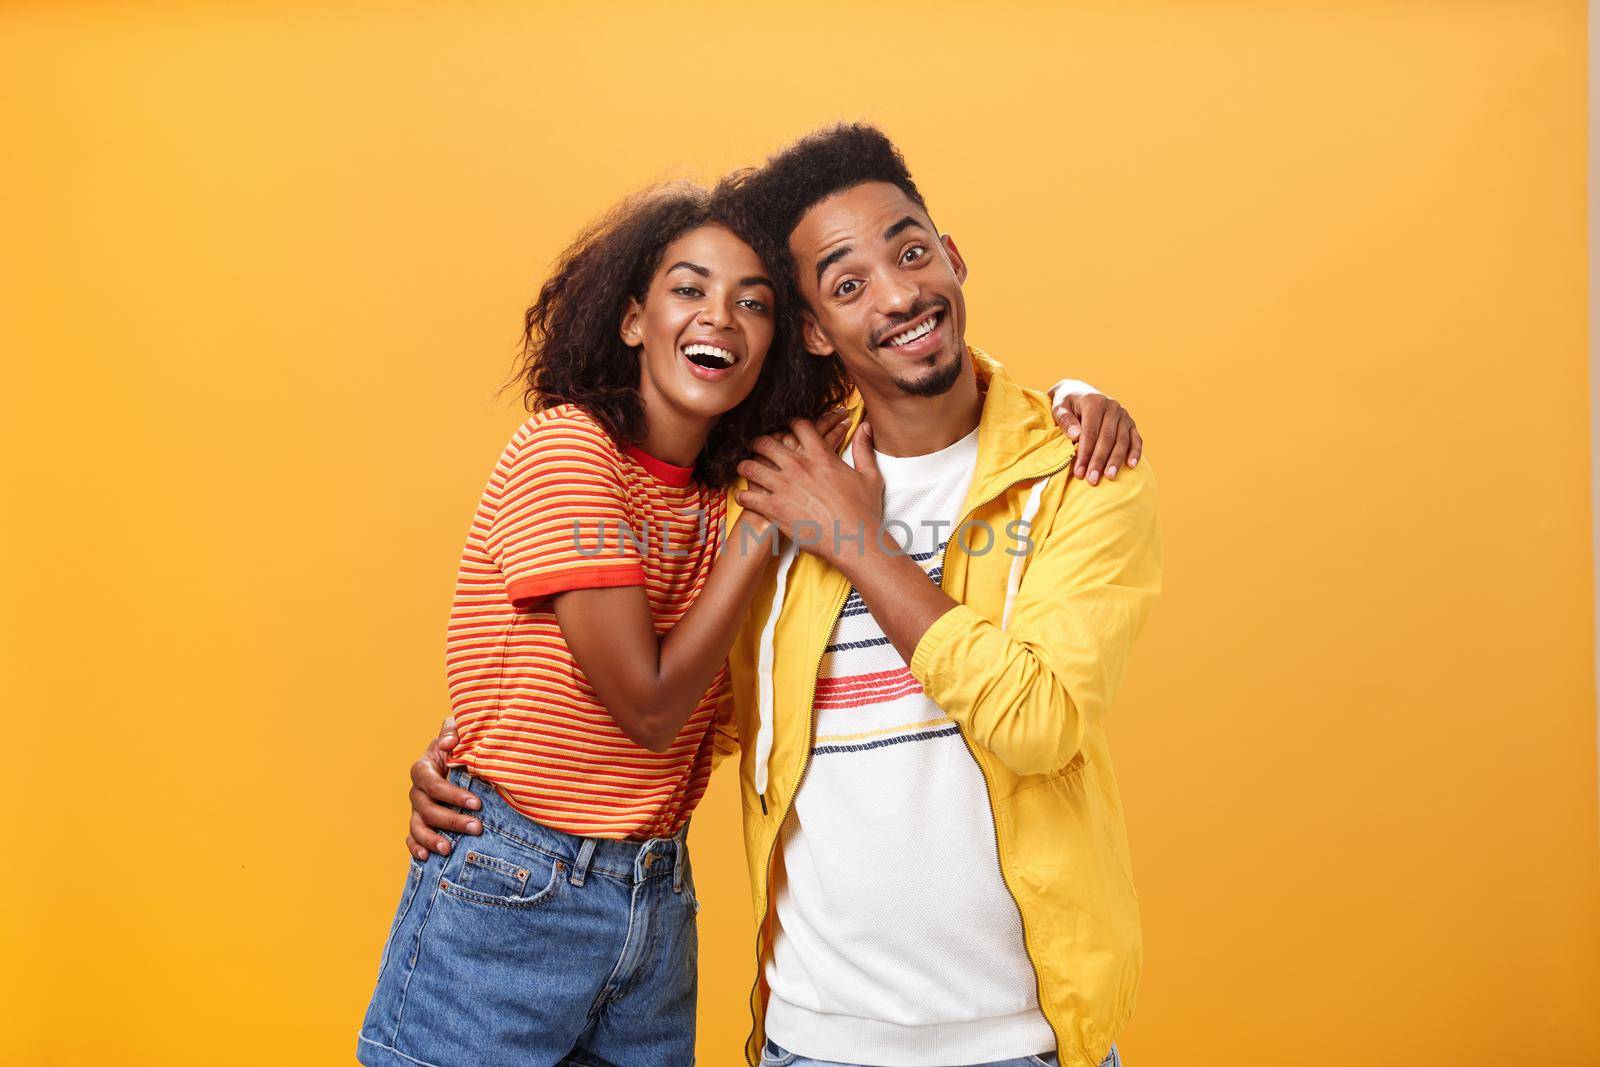 Friends always cover each other. Stylish and carefree loving african american girlfriend hugging boyfriend and smiling broadly touching guy palm hanging around and spending time great together.